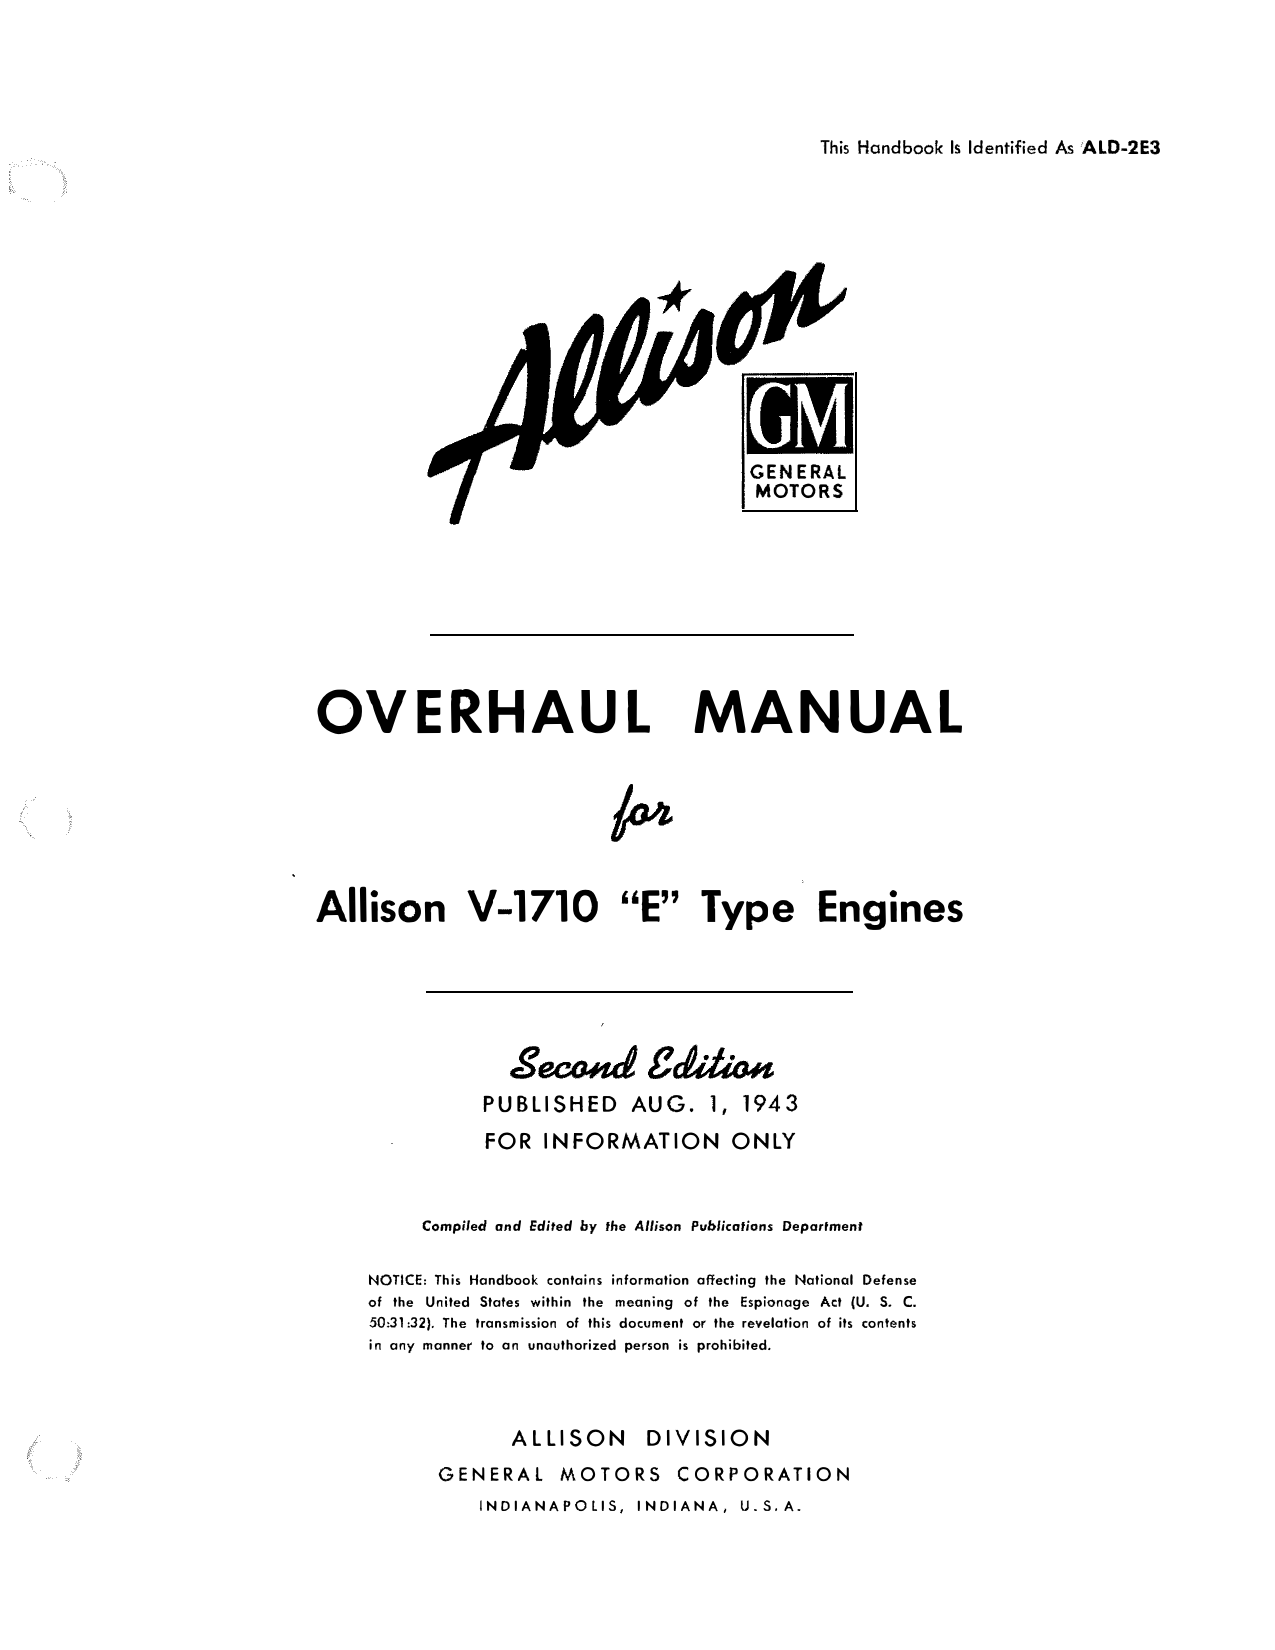 Sample page 1 from AirCorps Library document: Overhaul Manual - Allison V-1710-E Engine